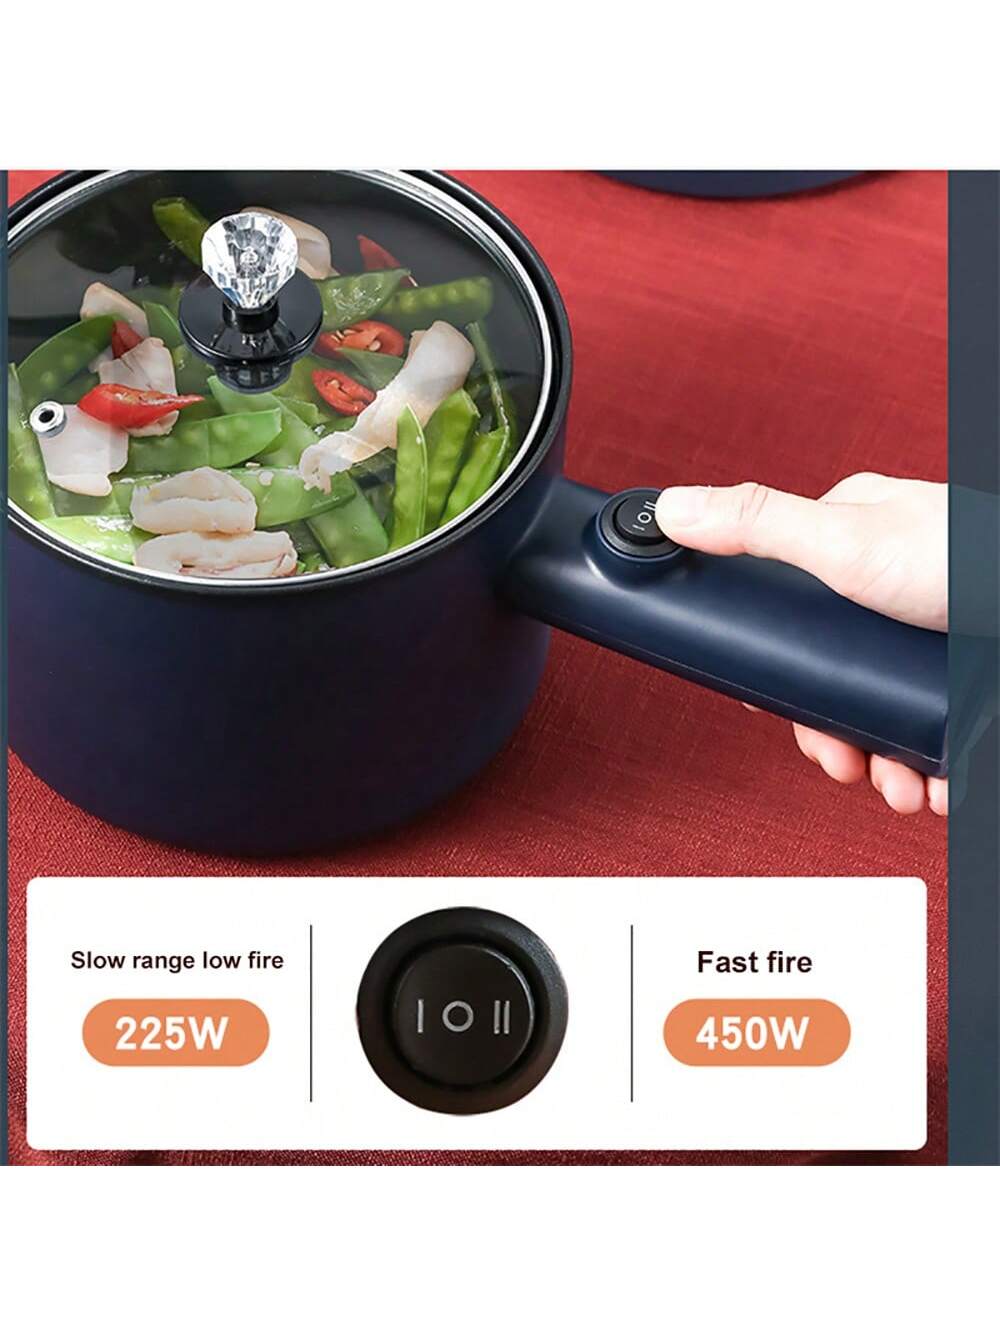 Multifunctional Electric Cooking Pot With Steamer, Non-stick Electric Fry Pan, 1-2 Person Mini Hot Pot Rice Cooker For Dormitory Student, Portable Outdoor Camping Heating Pot-Royal Blue-5